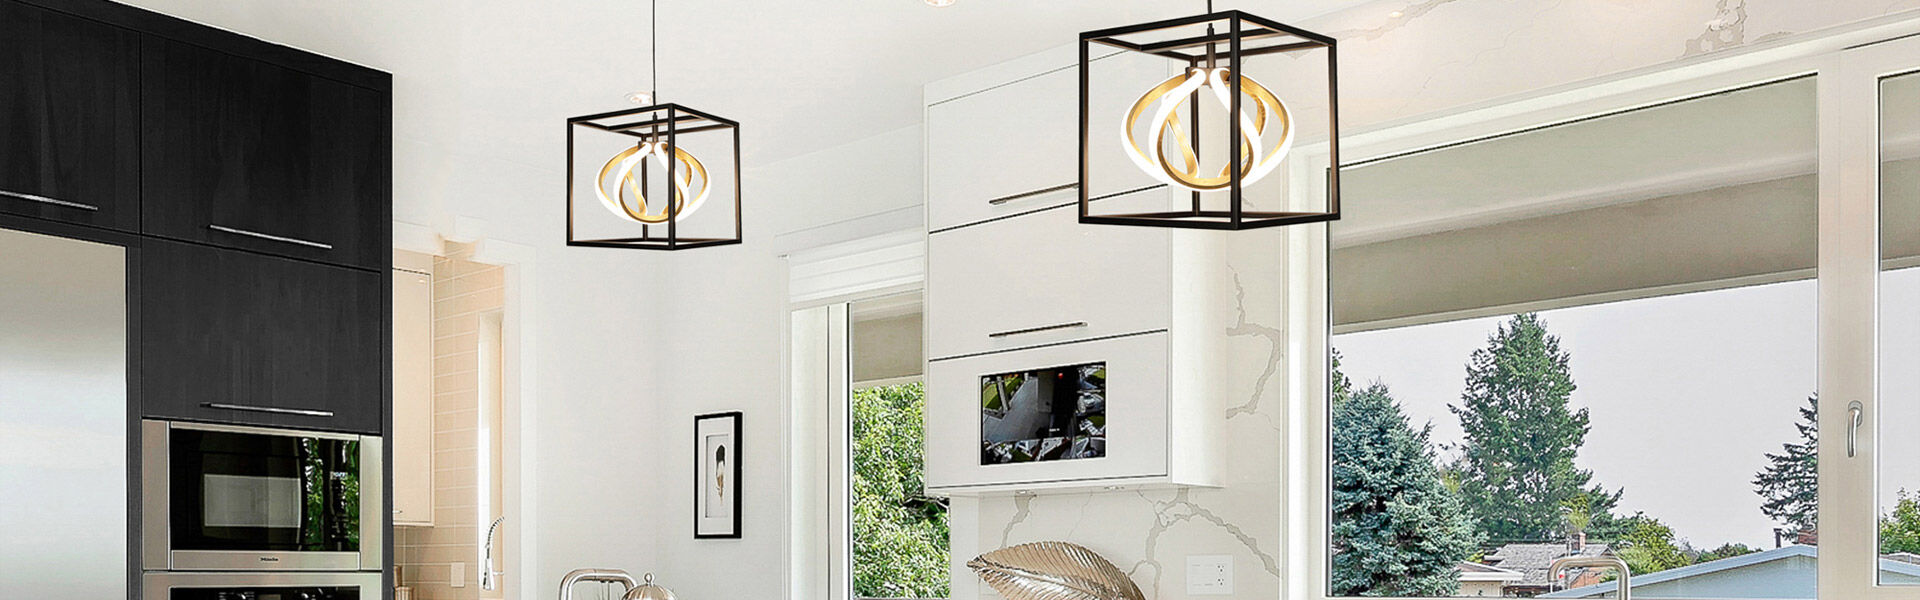 WAC Lighting | Up to 15% Off Select Designs | ends 5.1